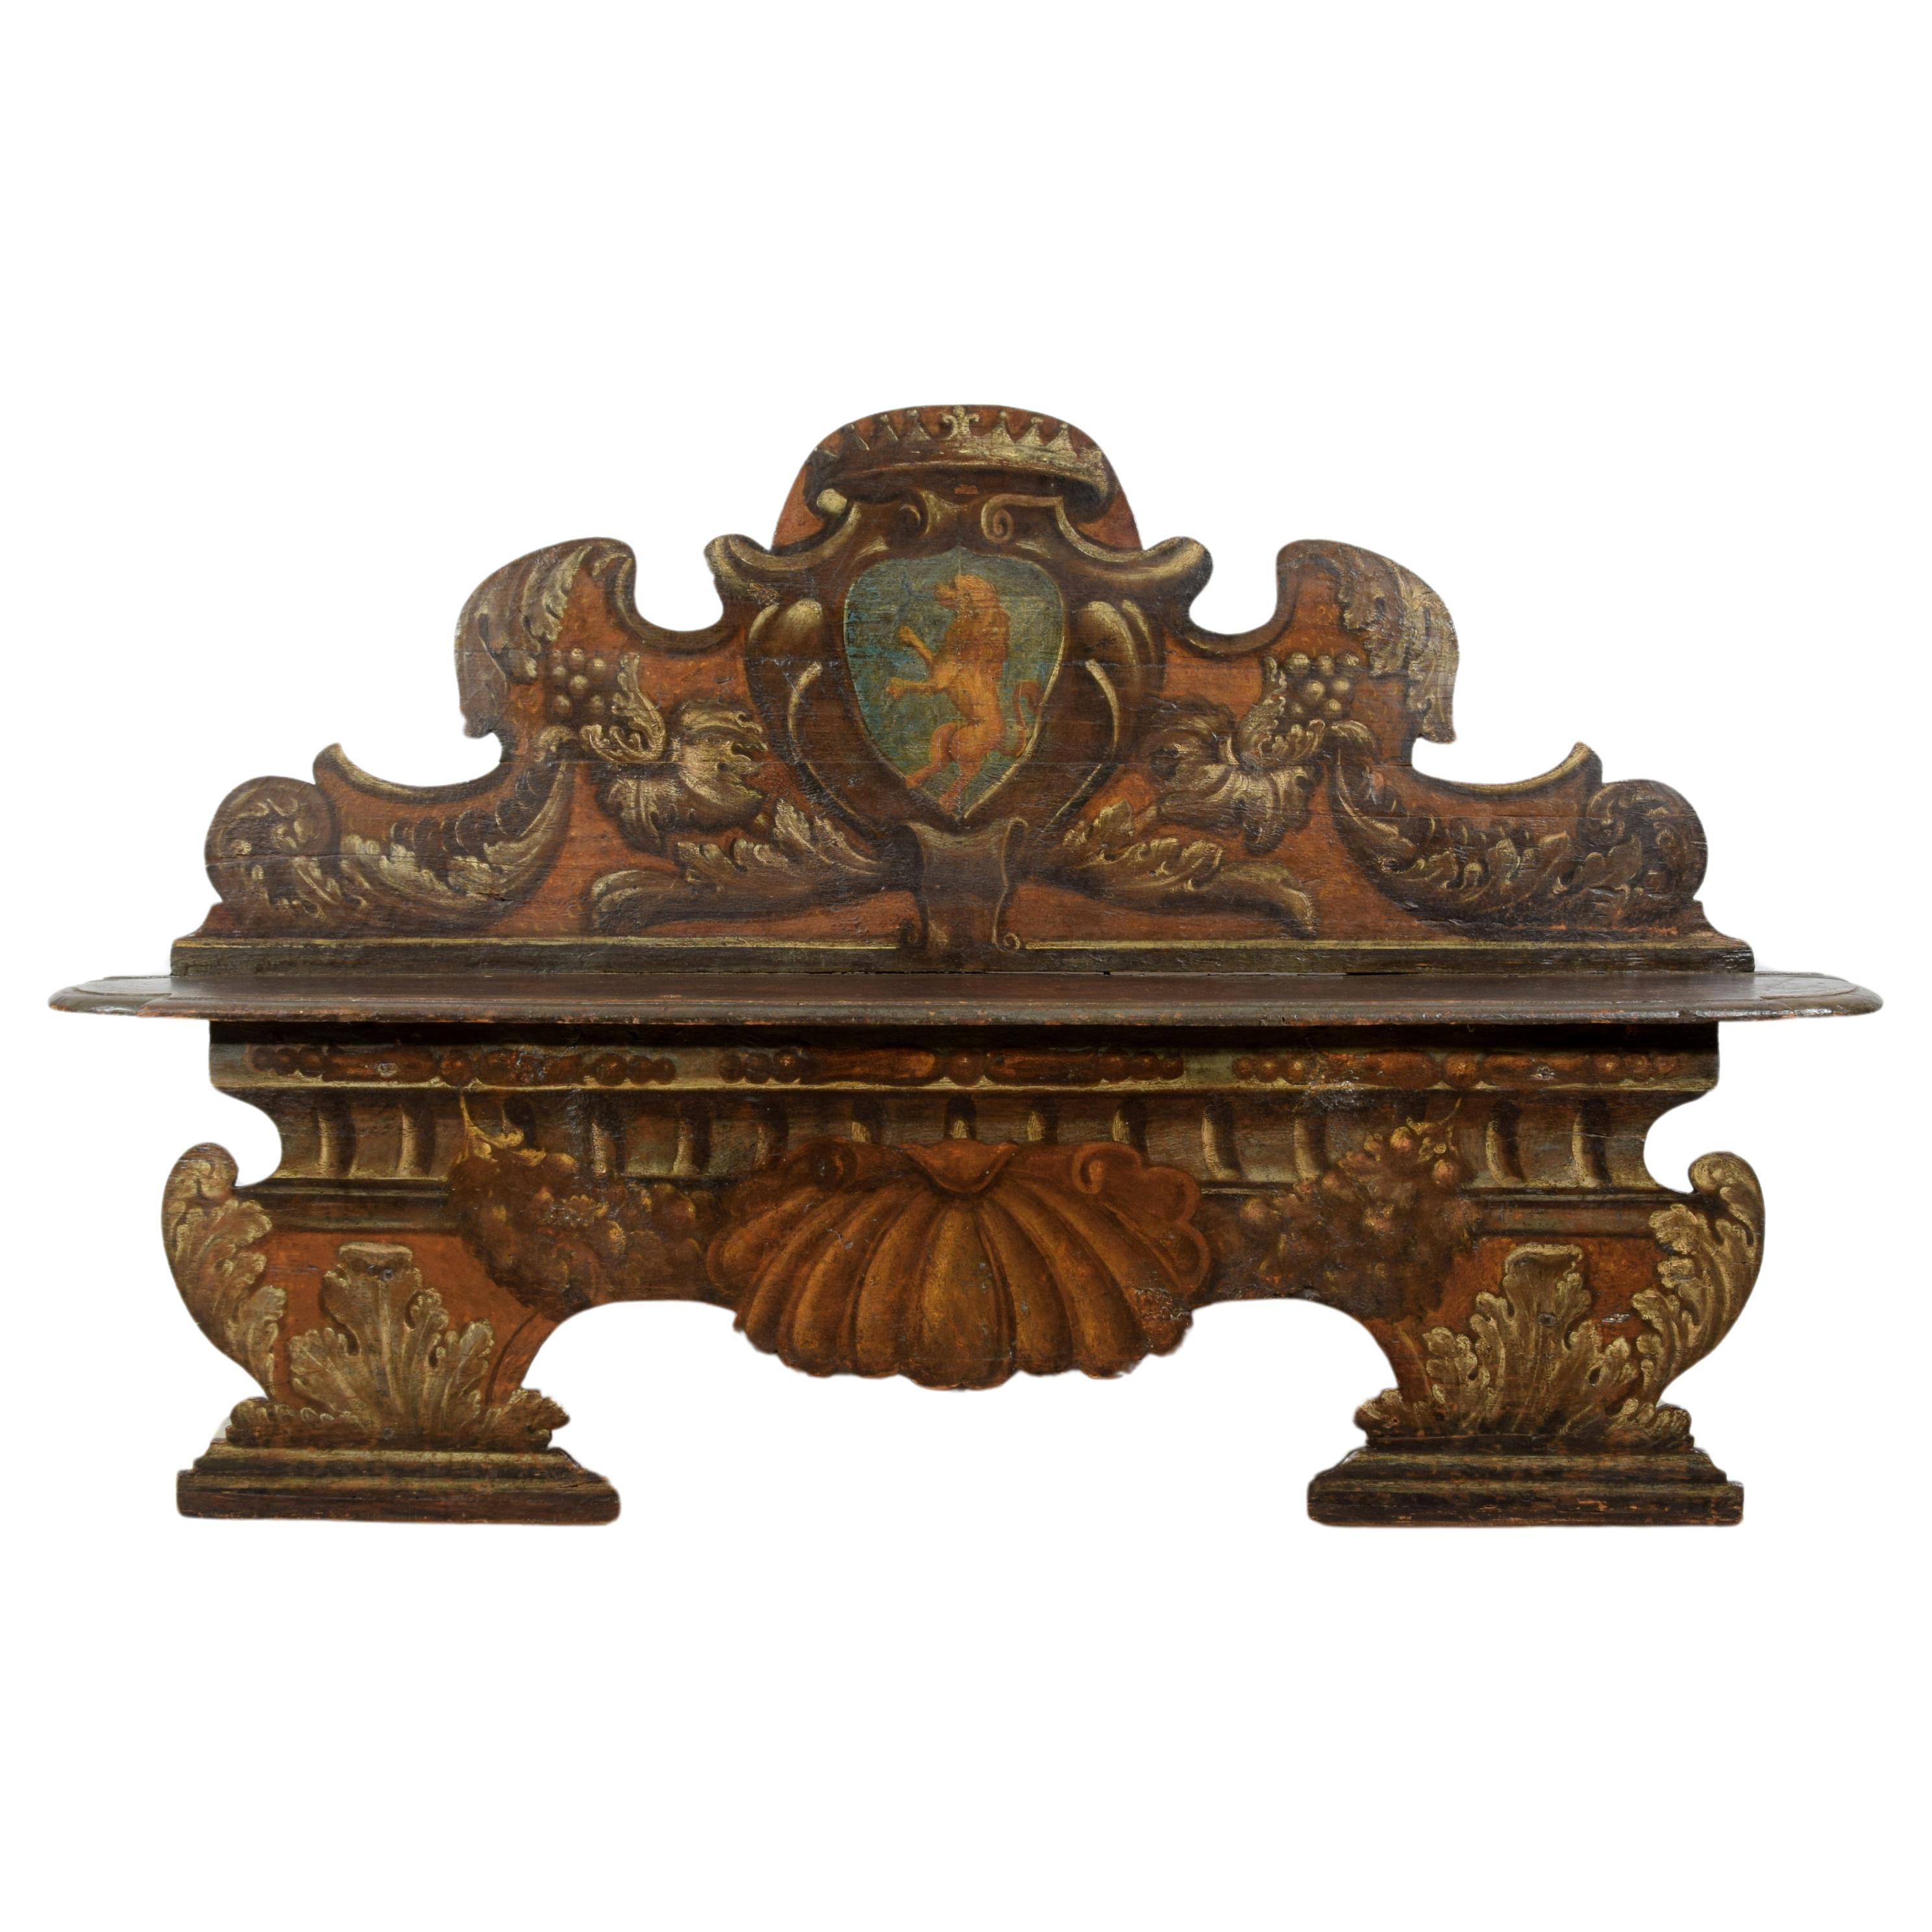 17th century, Italian Baroque Lacquered Wood Bench 